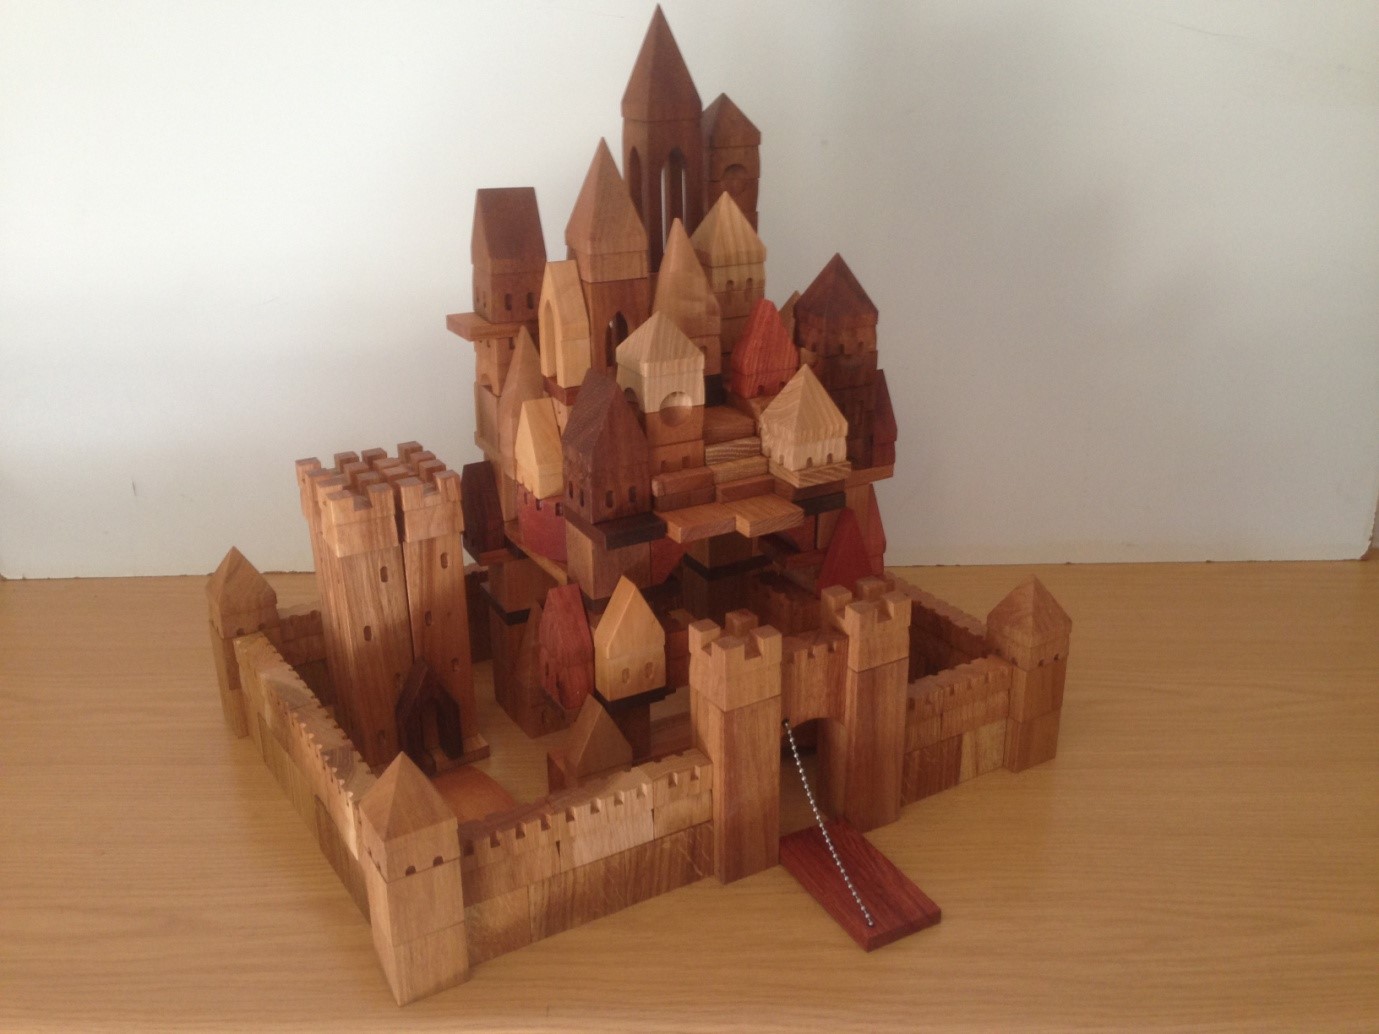 Walled Medieval city with drawbridge. Wooden blocks are made of hard and precious woods. Blocks for city: 130 pieces. Wall with drawbridge: 75 pieces